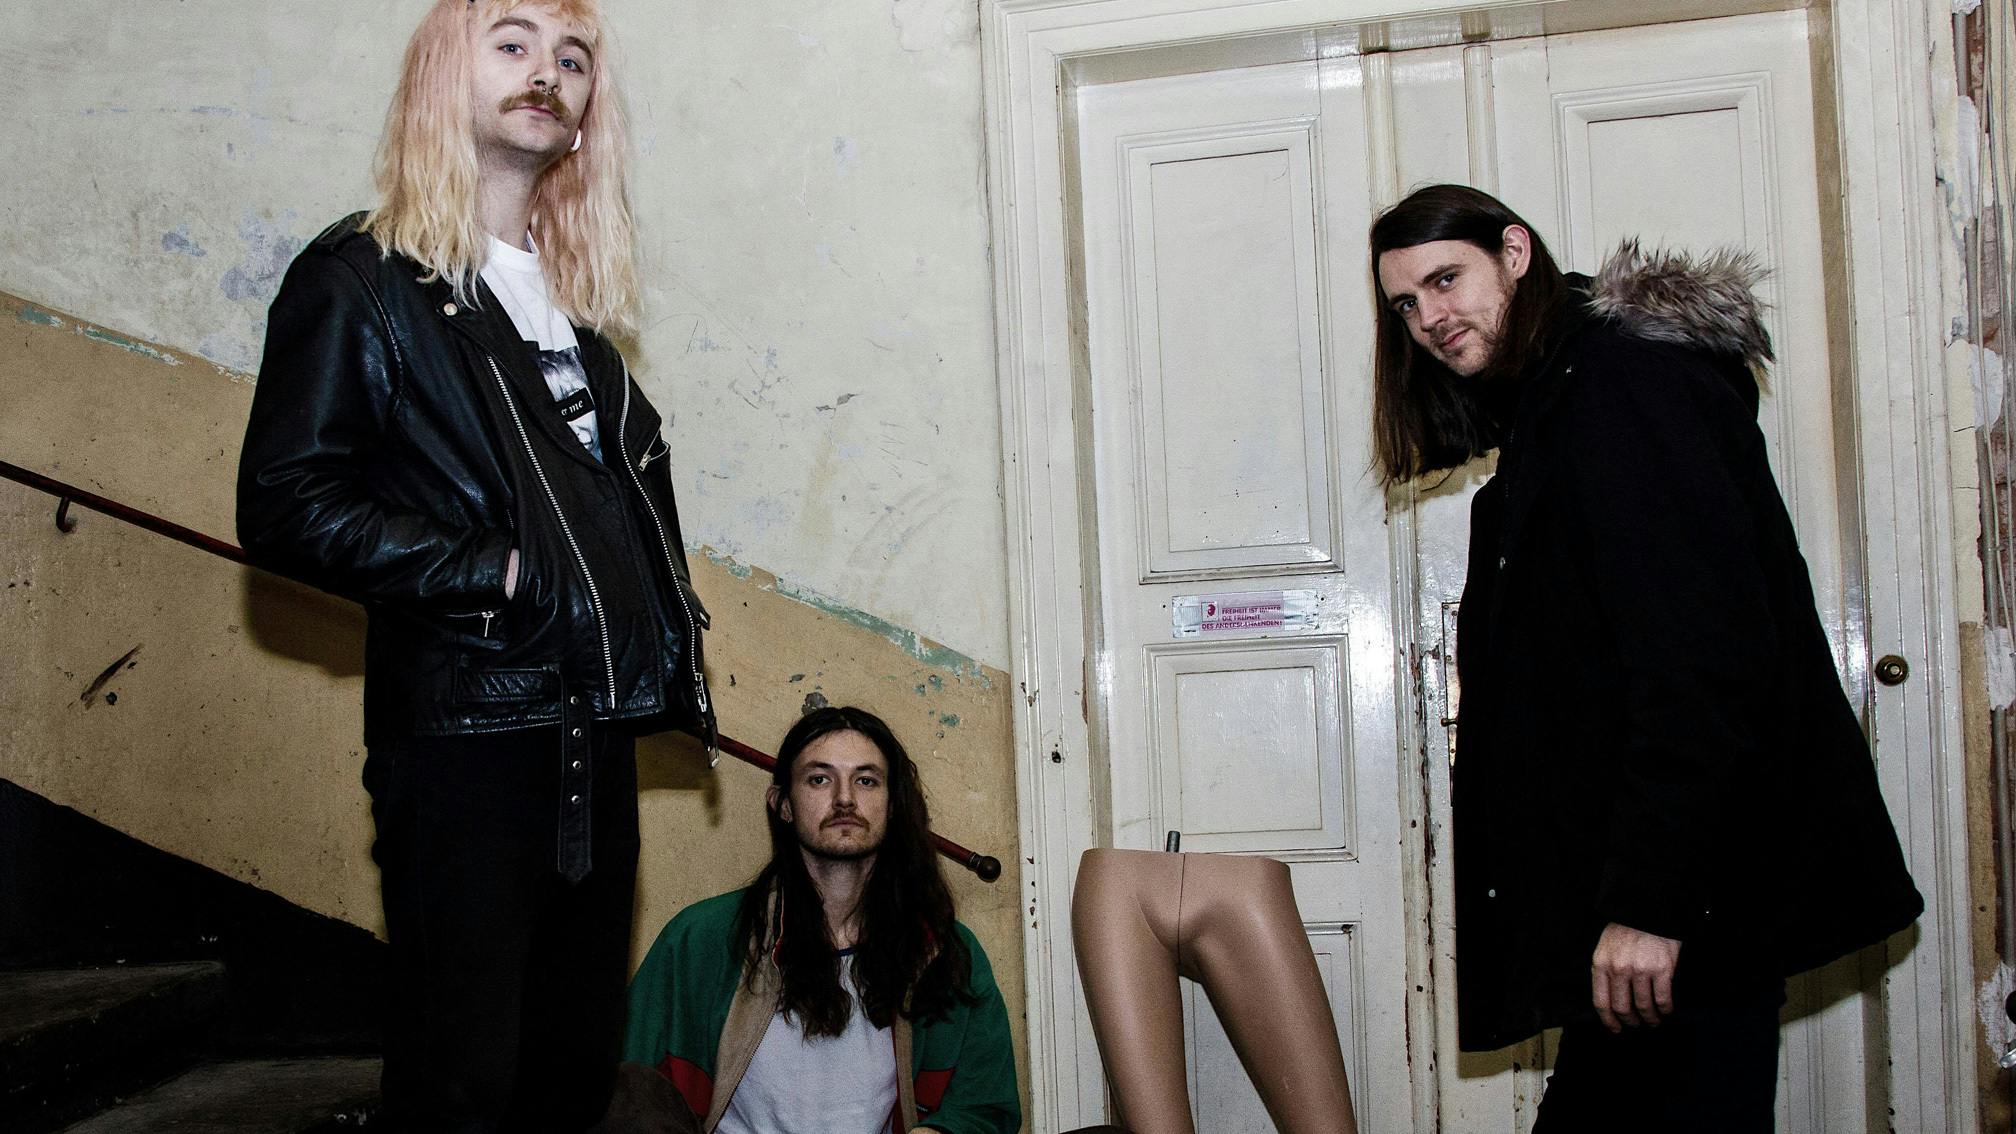 Gender Roles share dynamic new single Dead Or Alive, announce double A-side vinyl